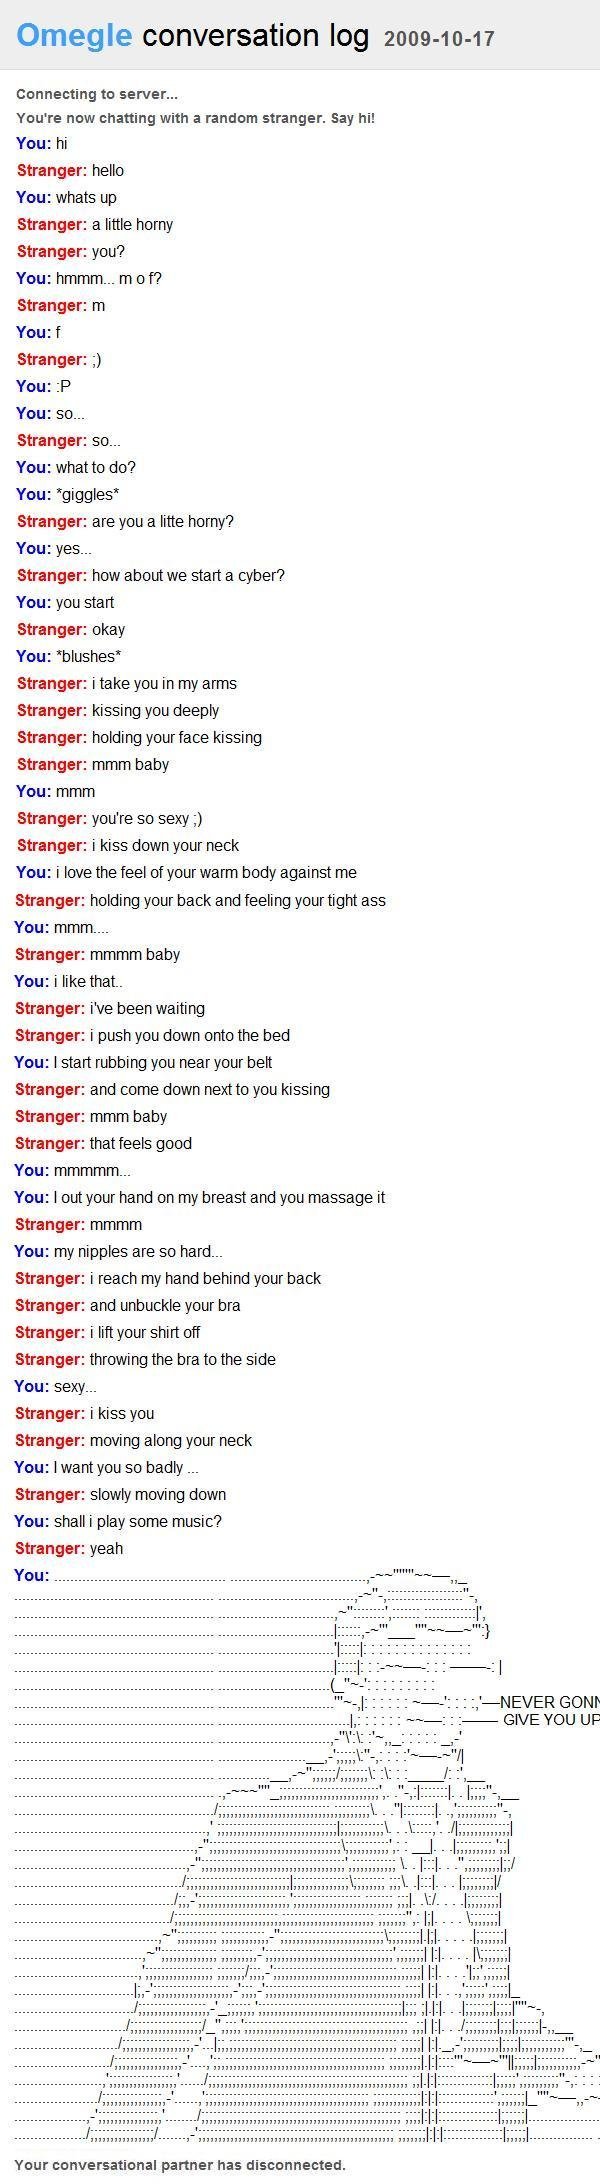 Owned on Omegle